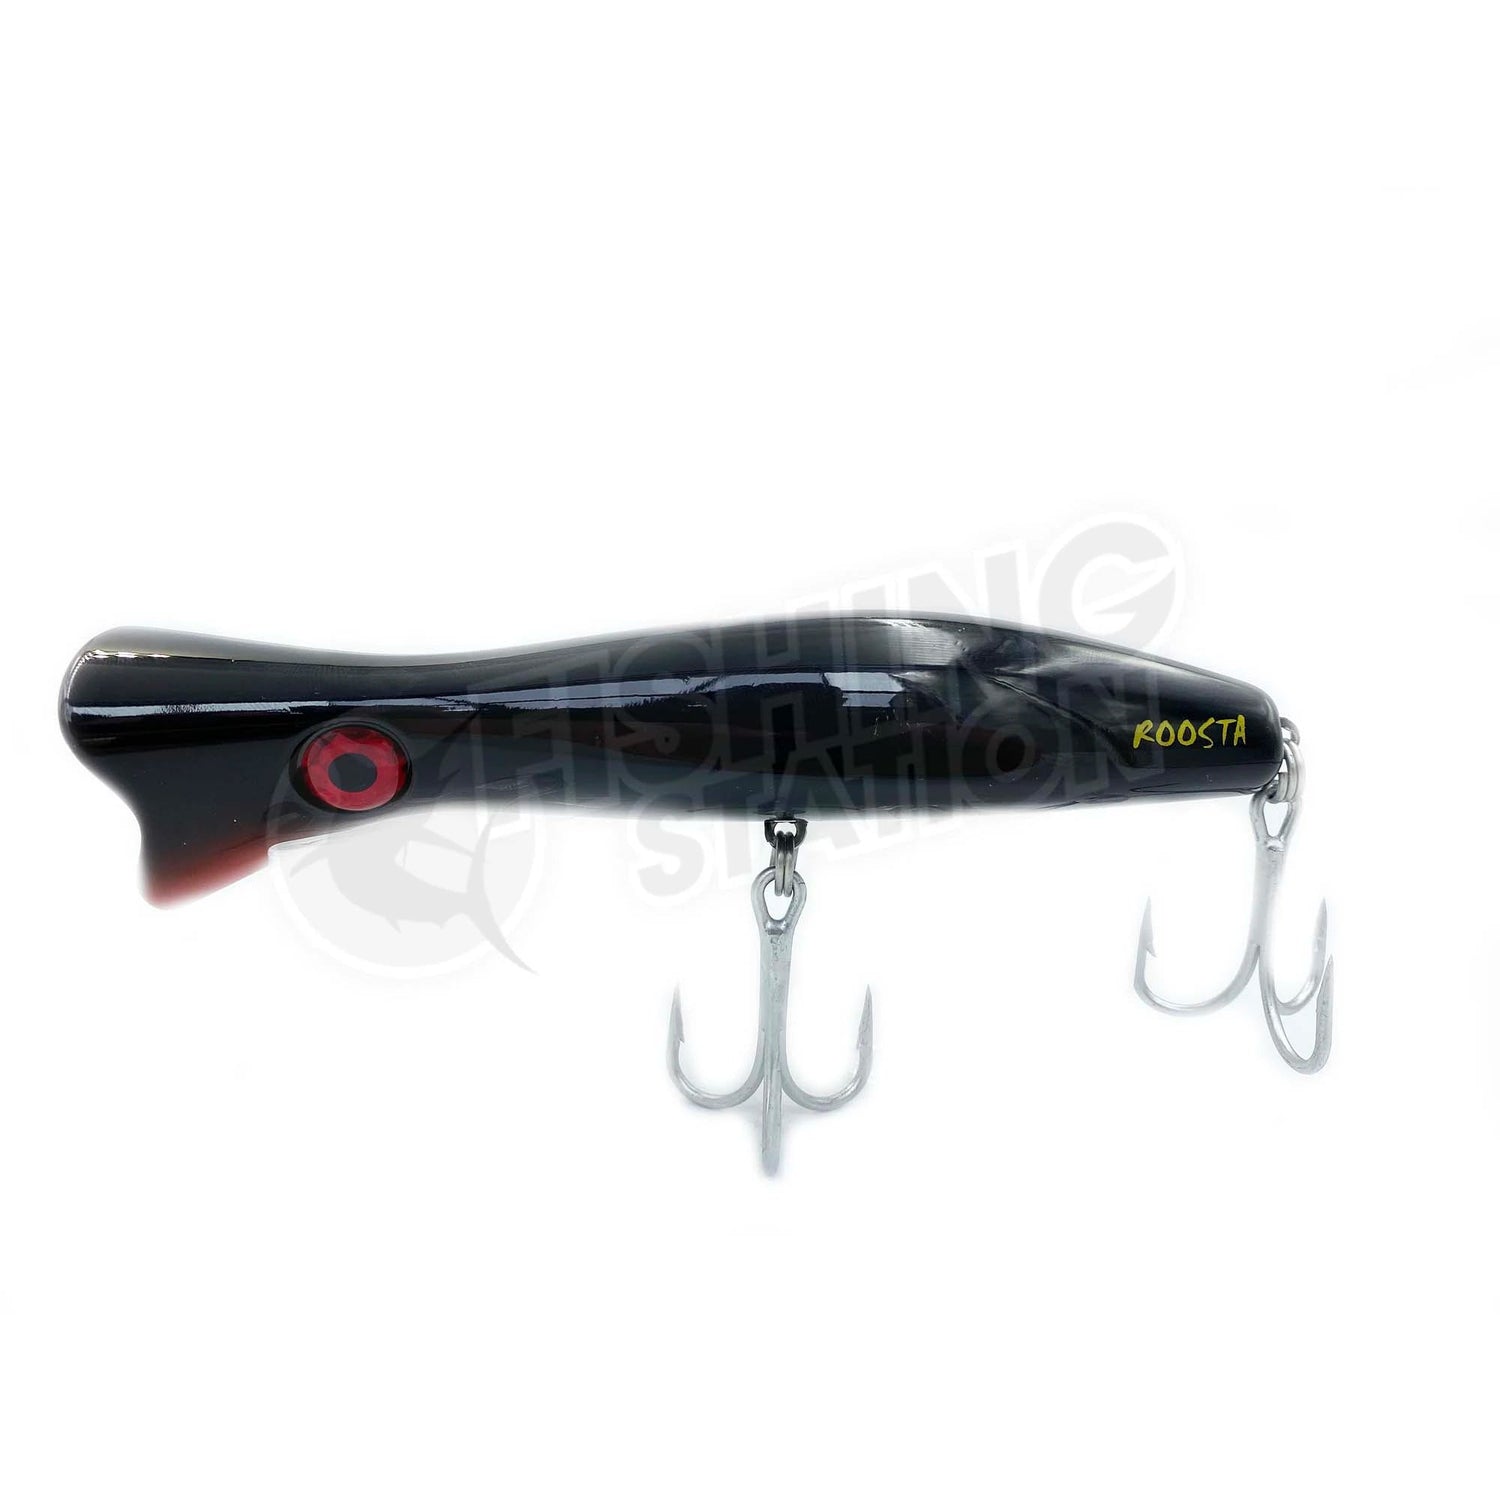 Halco Roosta Popper-Lure - Poppers, Stickbaits & Pencils-Halco-135mm-R30 Black #1346-Fishing Station